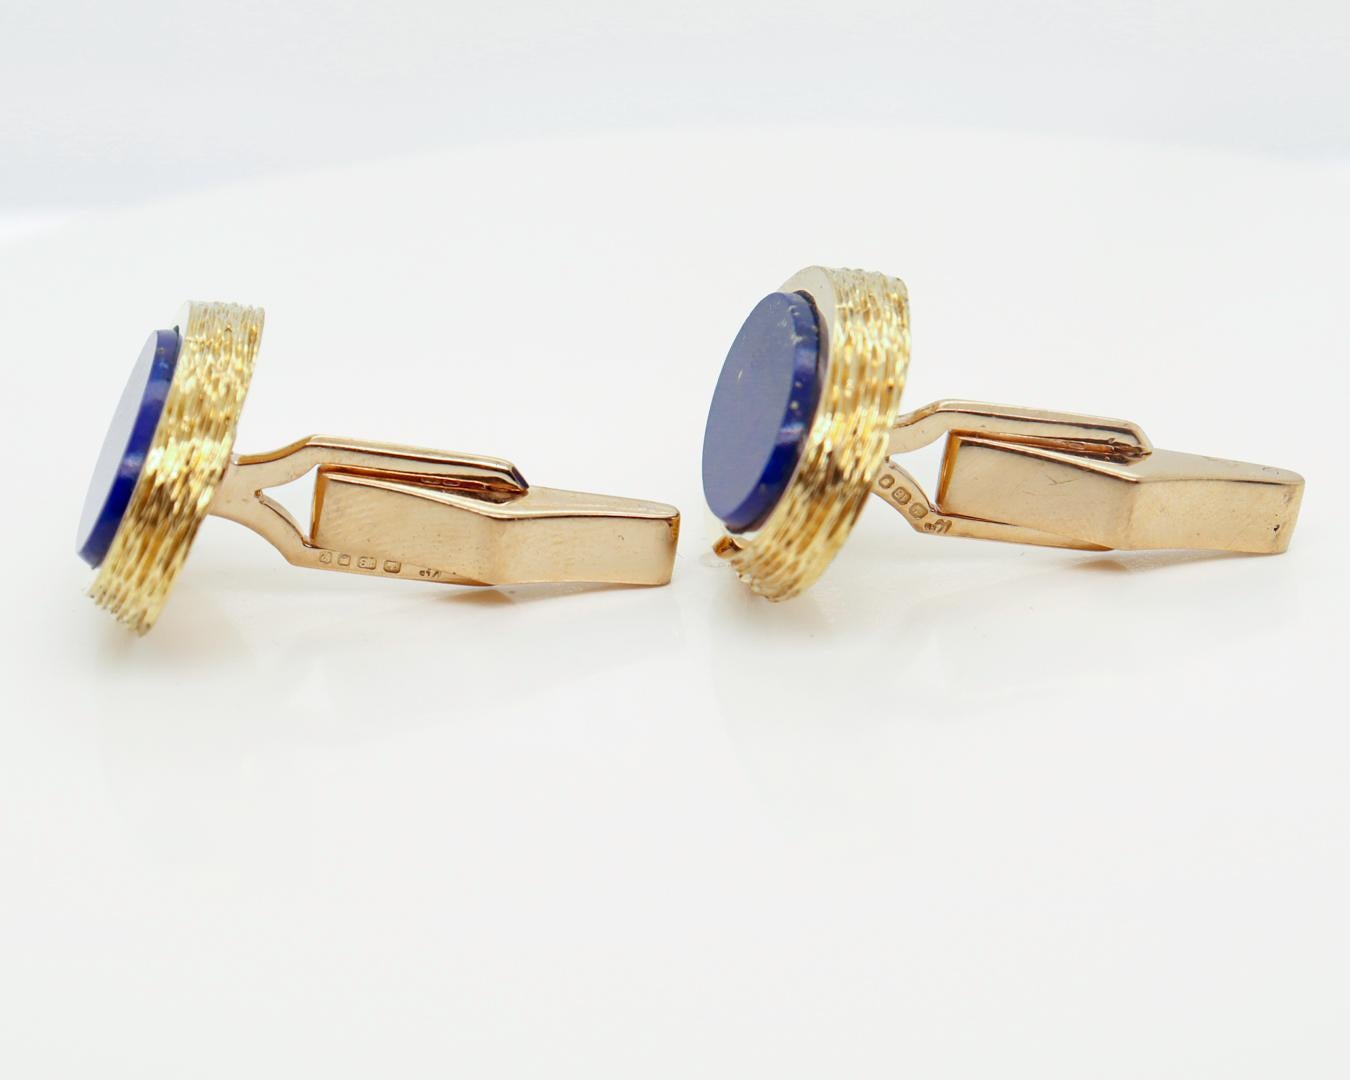 Pair of English Mid-Century Modern 18k Gold & Lapis Cufflinks by Kutchinsky For Sale 5